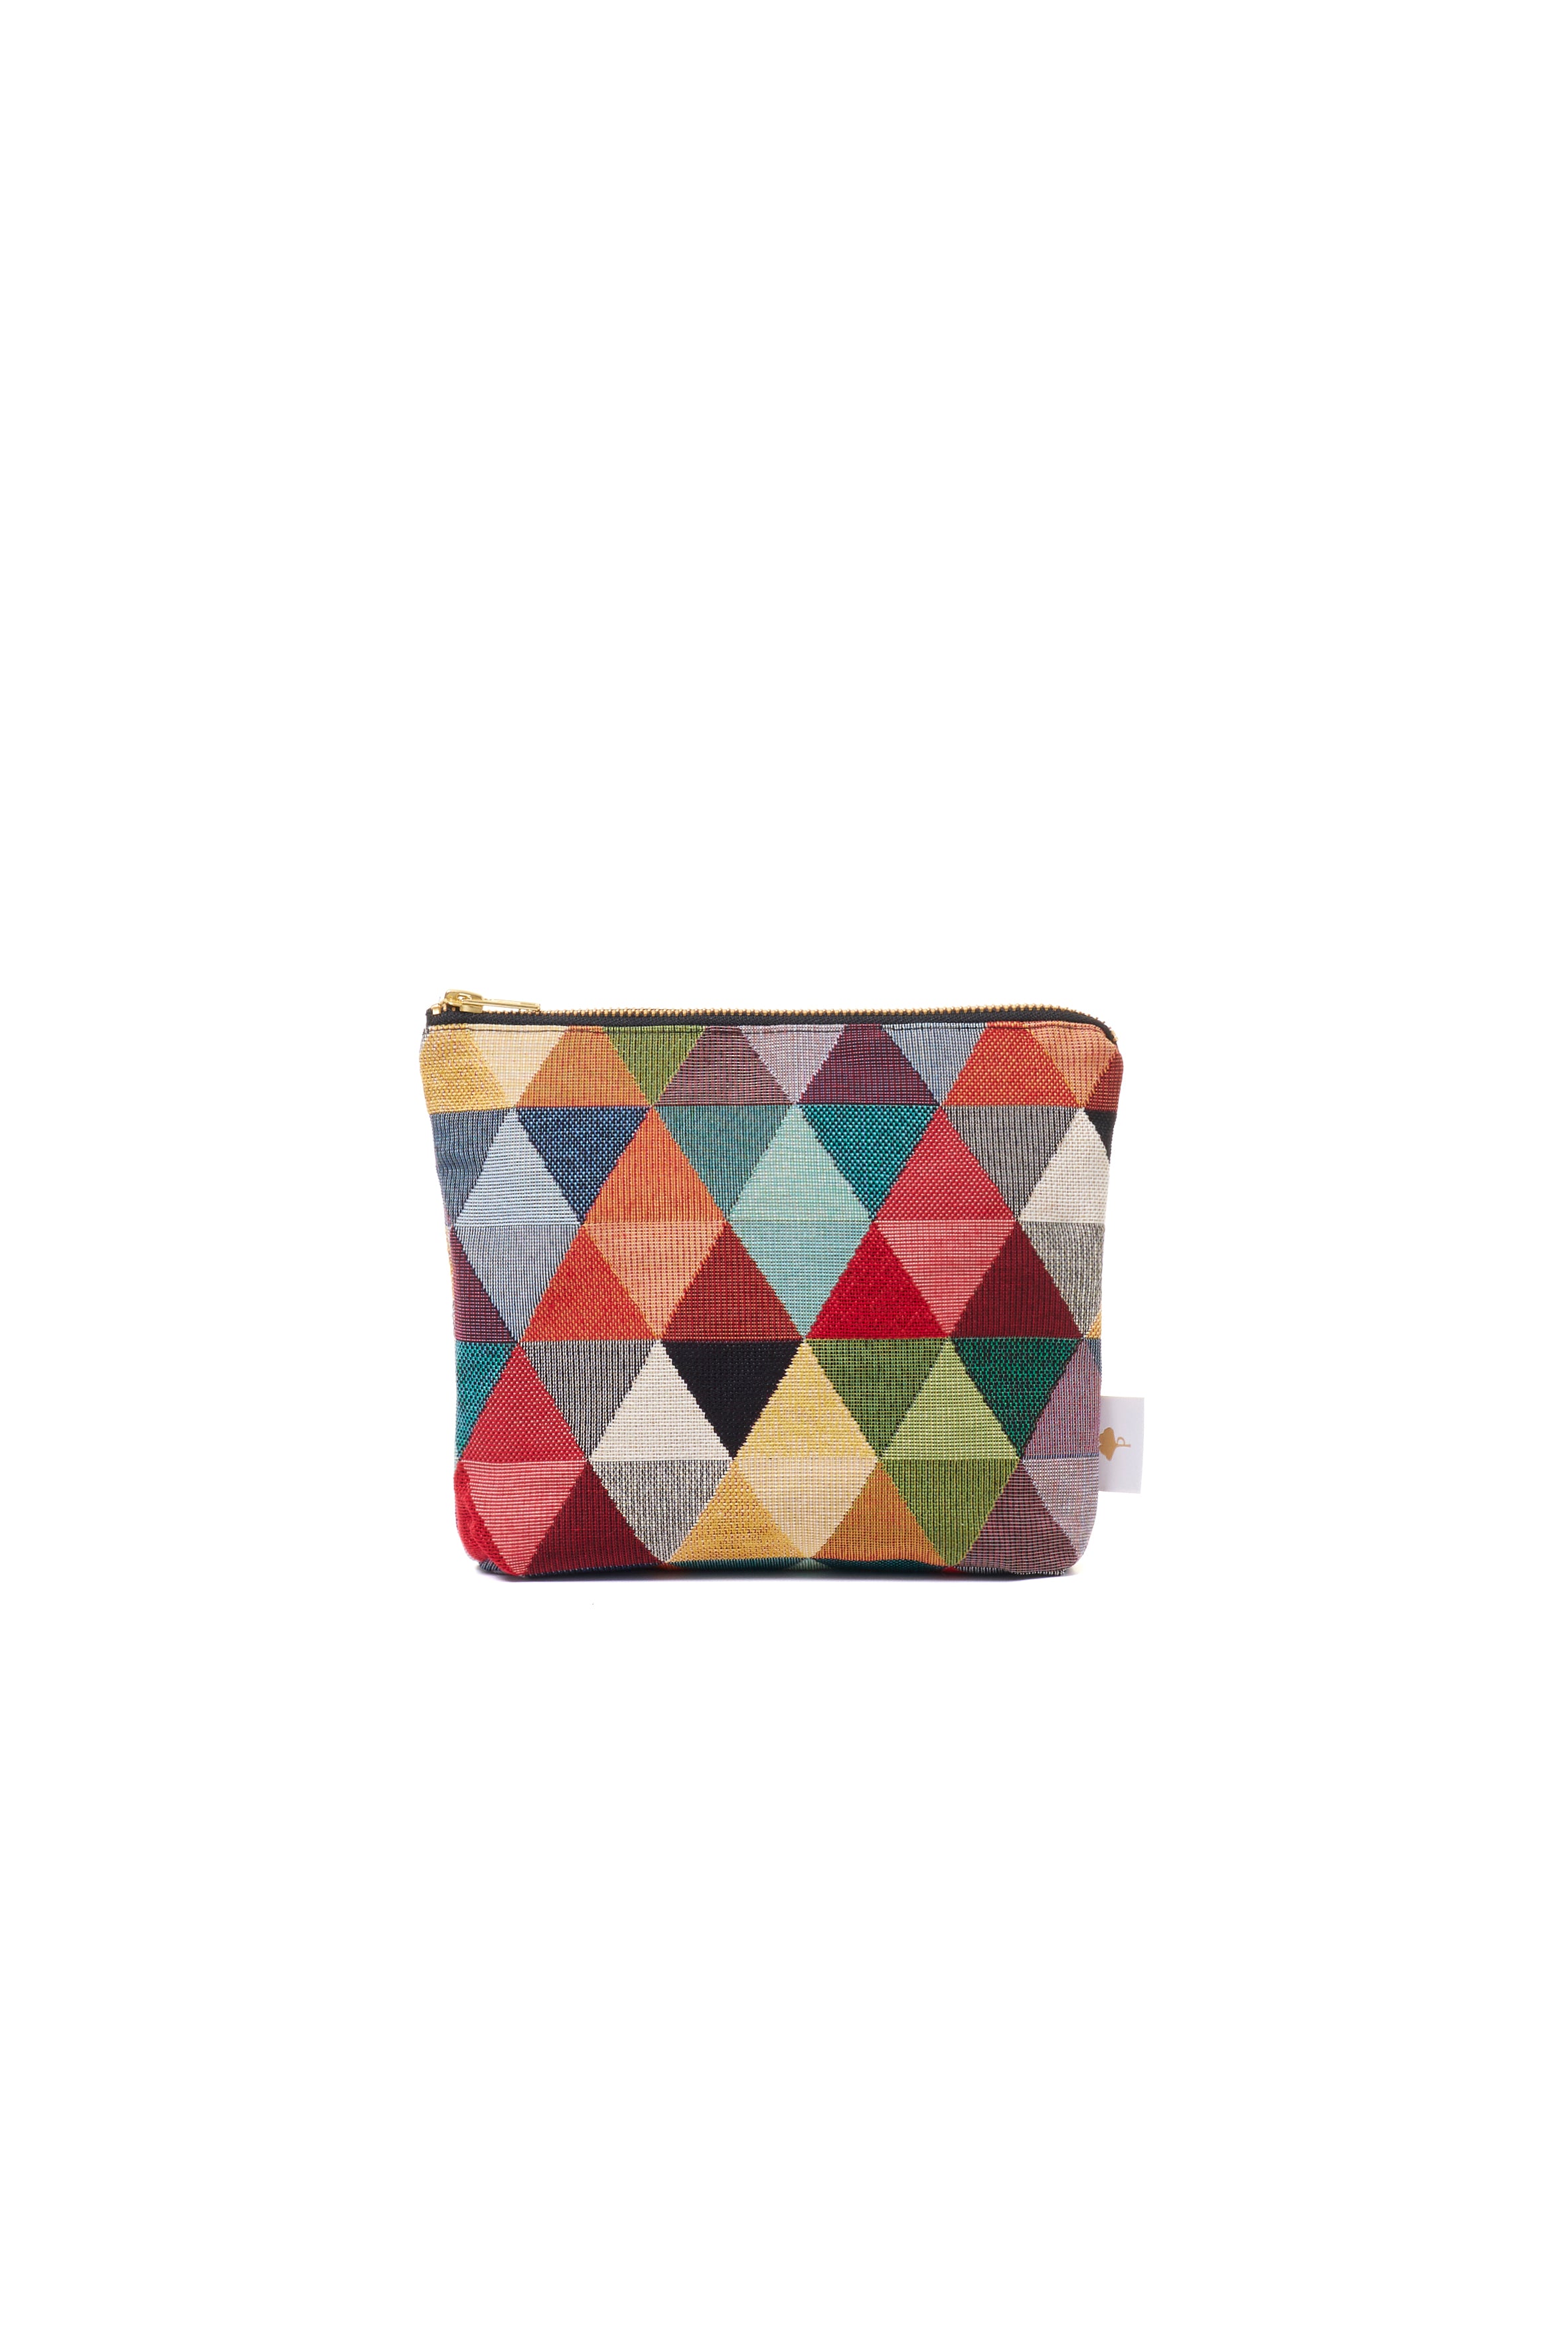 TRAVEL POUCH SMALL - GEOMETRIC